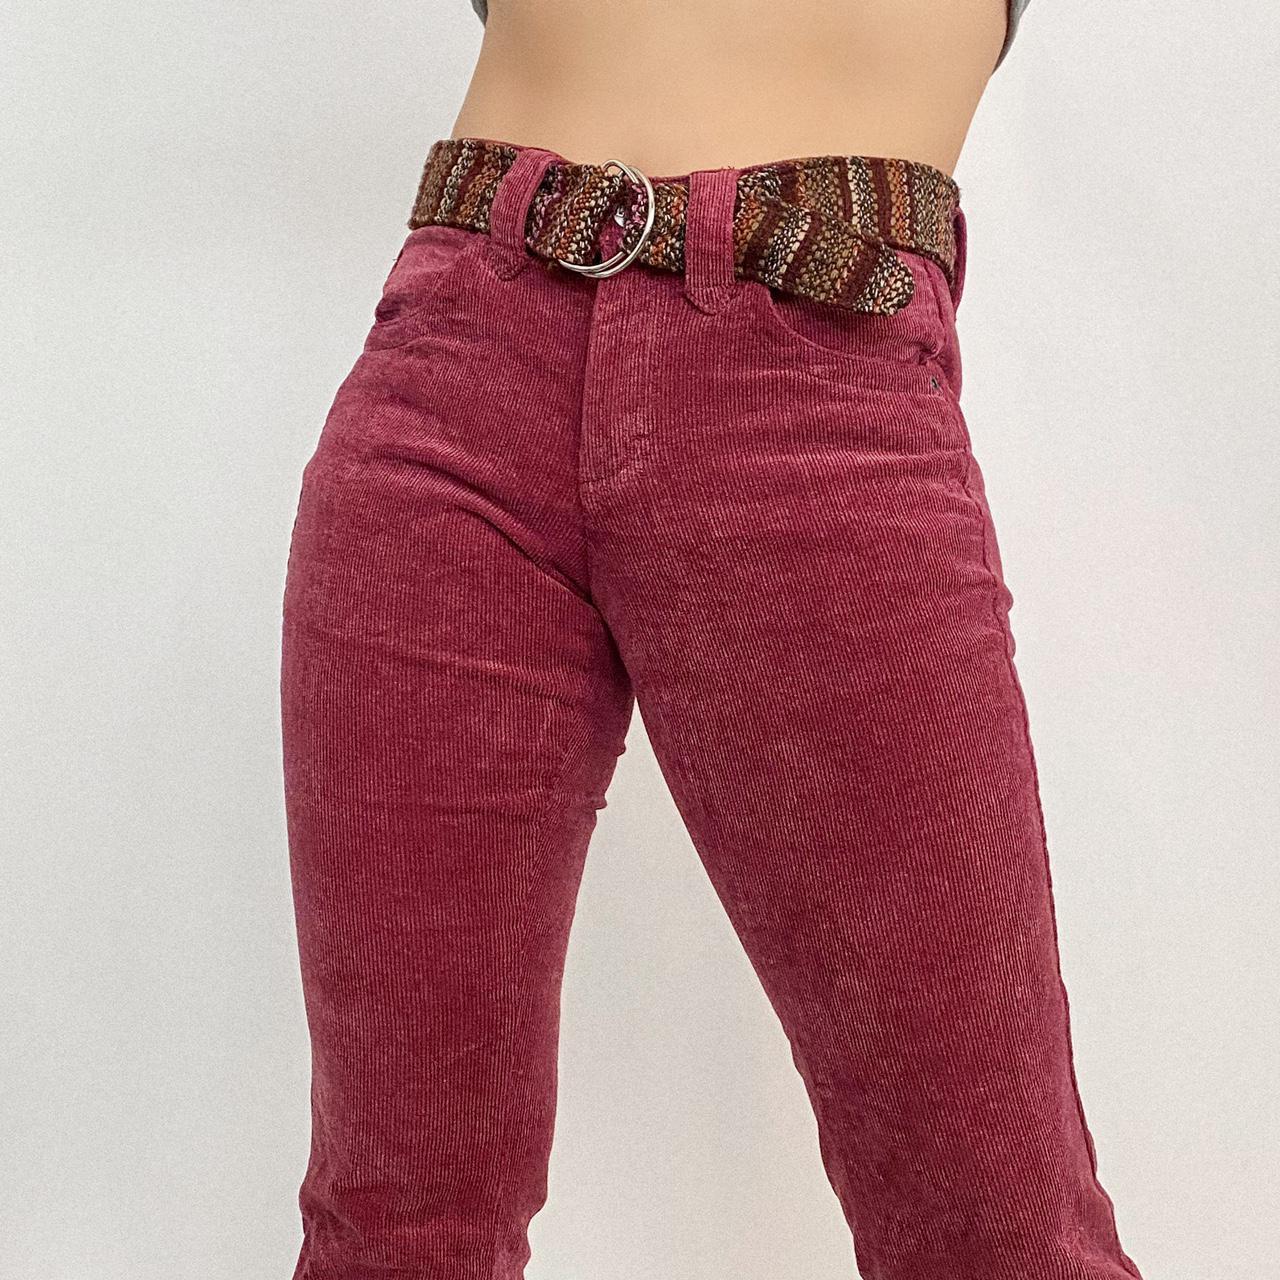 Lee Women's Pink and Burgundy Jeans (3)